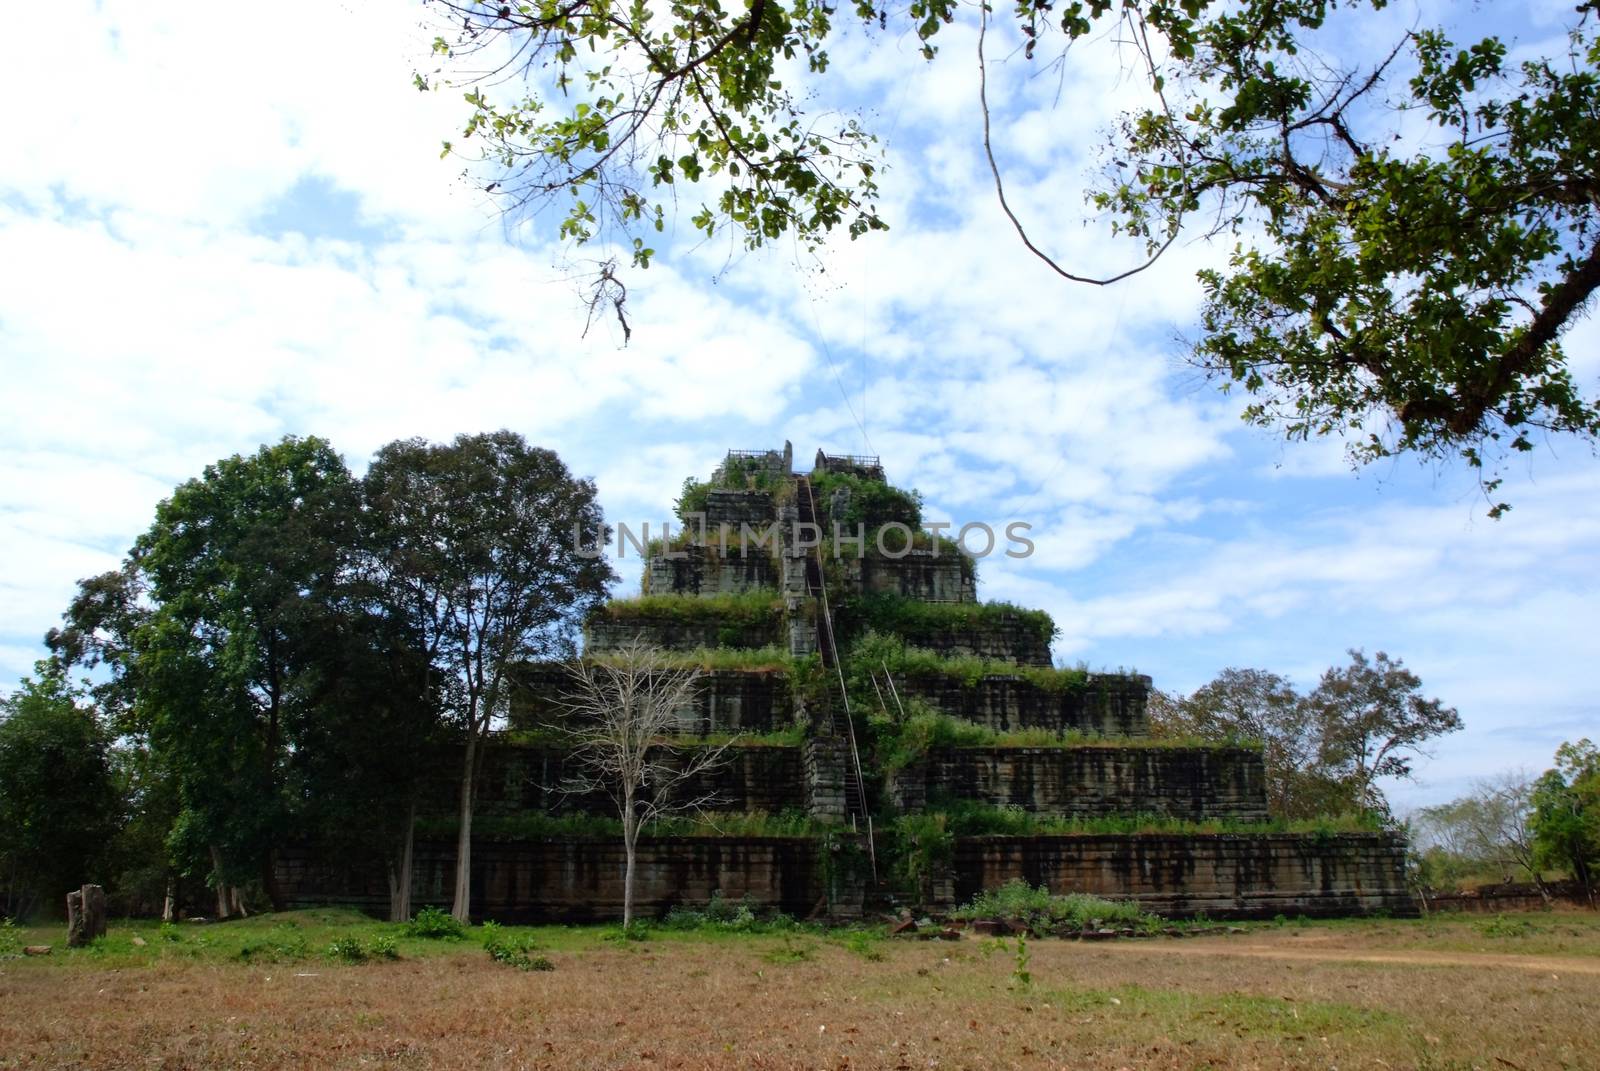 View of the seven tiered pyramid at Koh Ker by ideation90